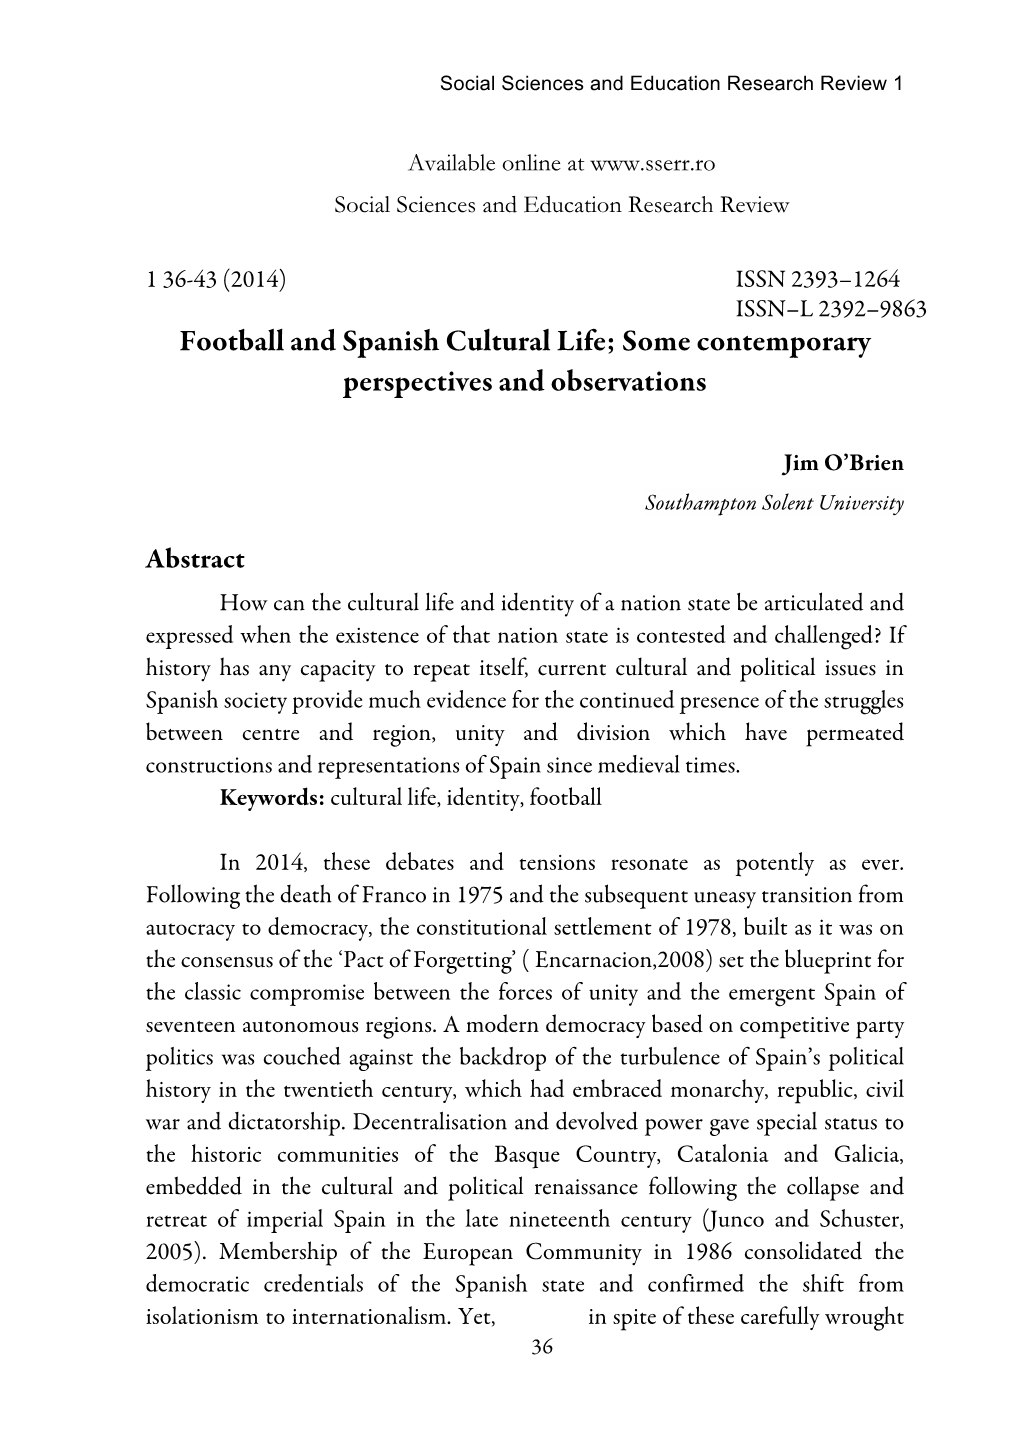 Football and Spanish Cultural Life; Some Contemporary Perspectives and Observations